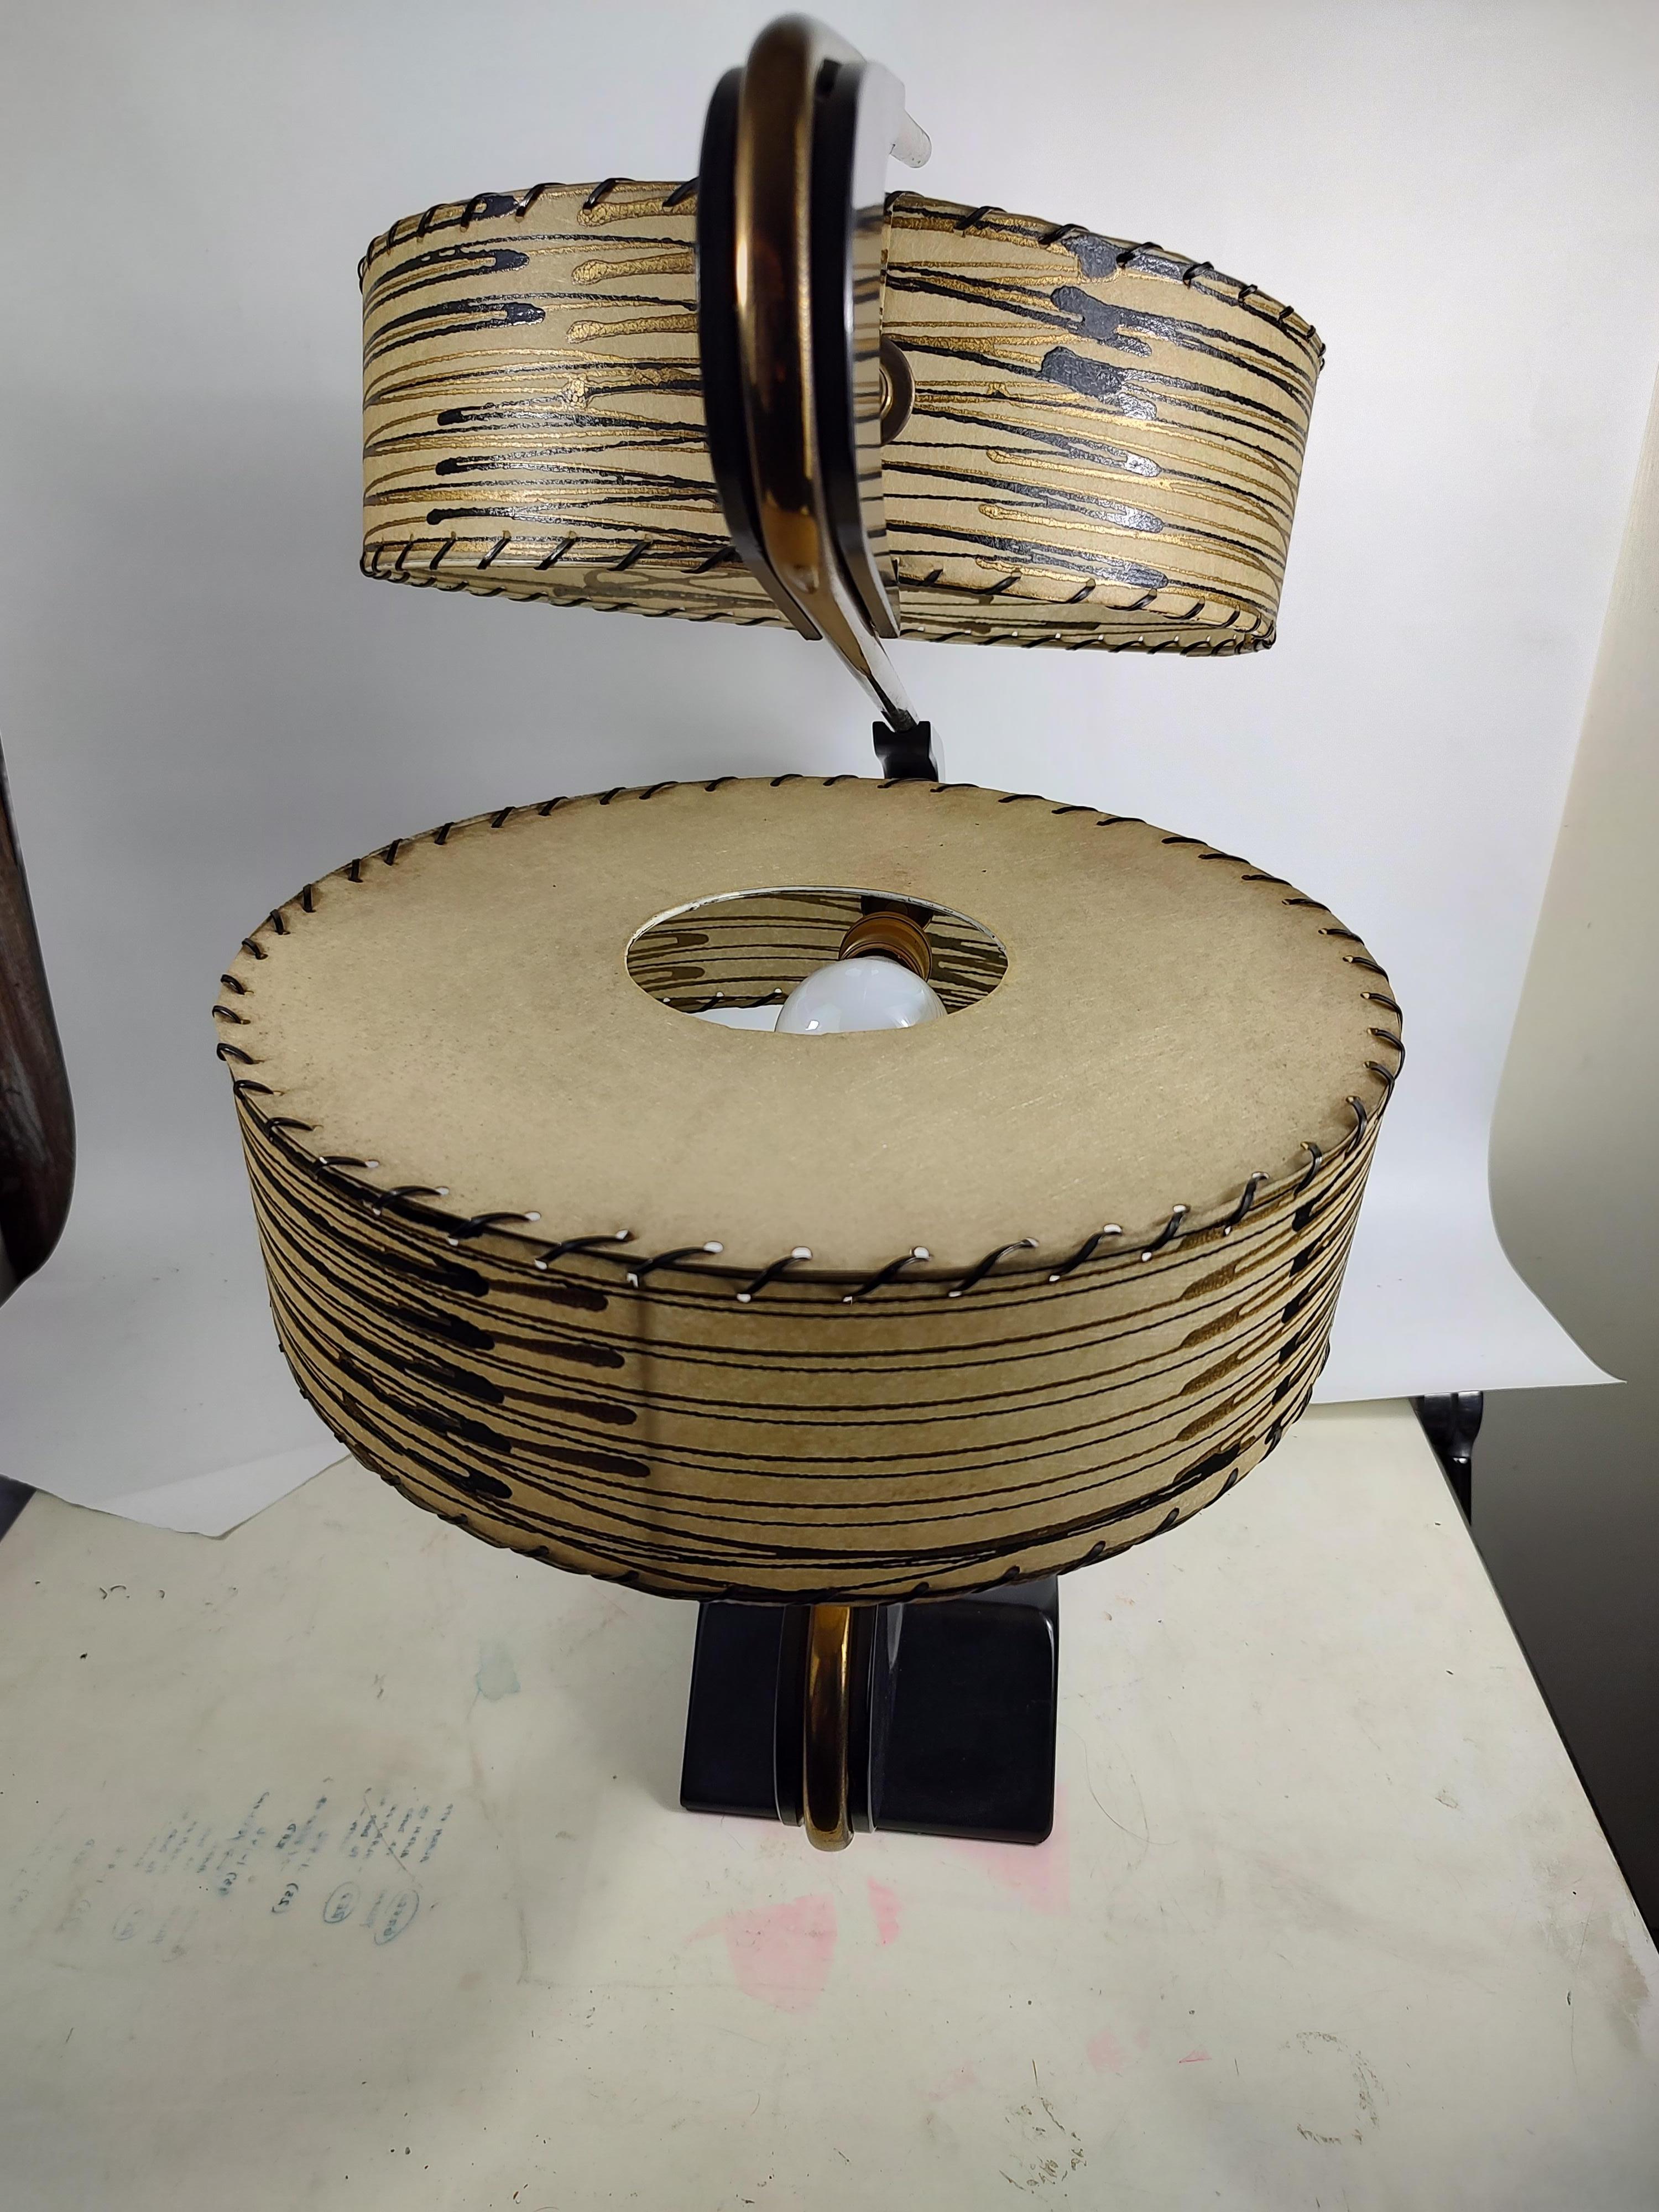 Hand-Crafted Mid-Century Modern Table Lamp with Tambourine Shades by Majestic Lamp Co.